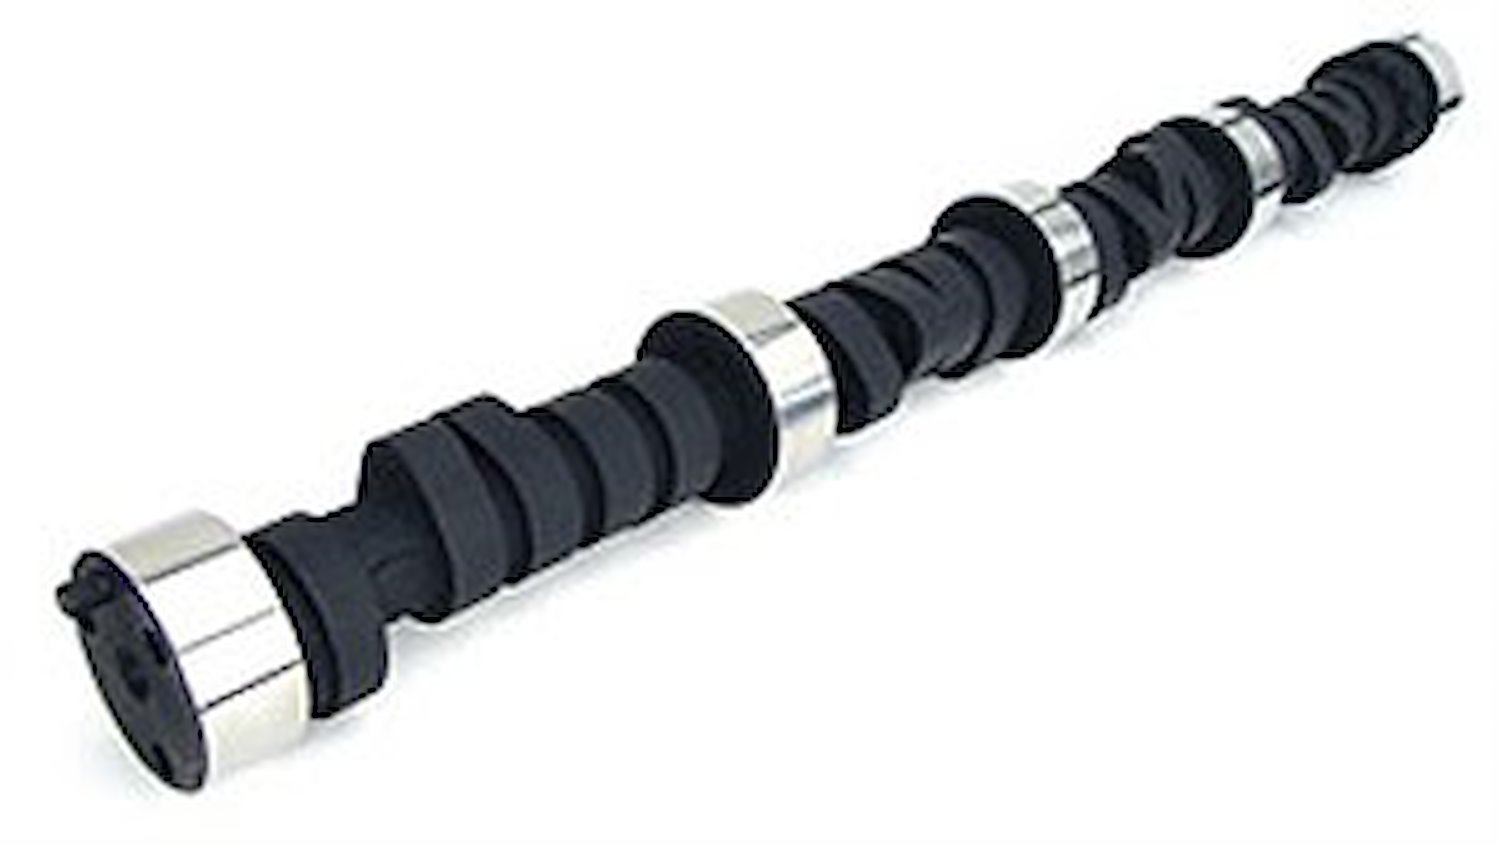 Xtreme Energy 256H Hydraulic Flat Tappet Camshaft Only Lift: .477"/.484" Duration: 256°/268° RPM Range: 1200-5200